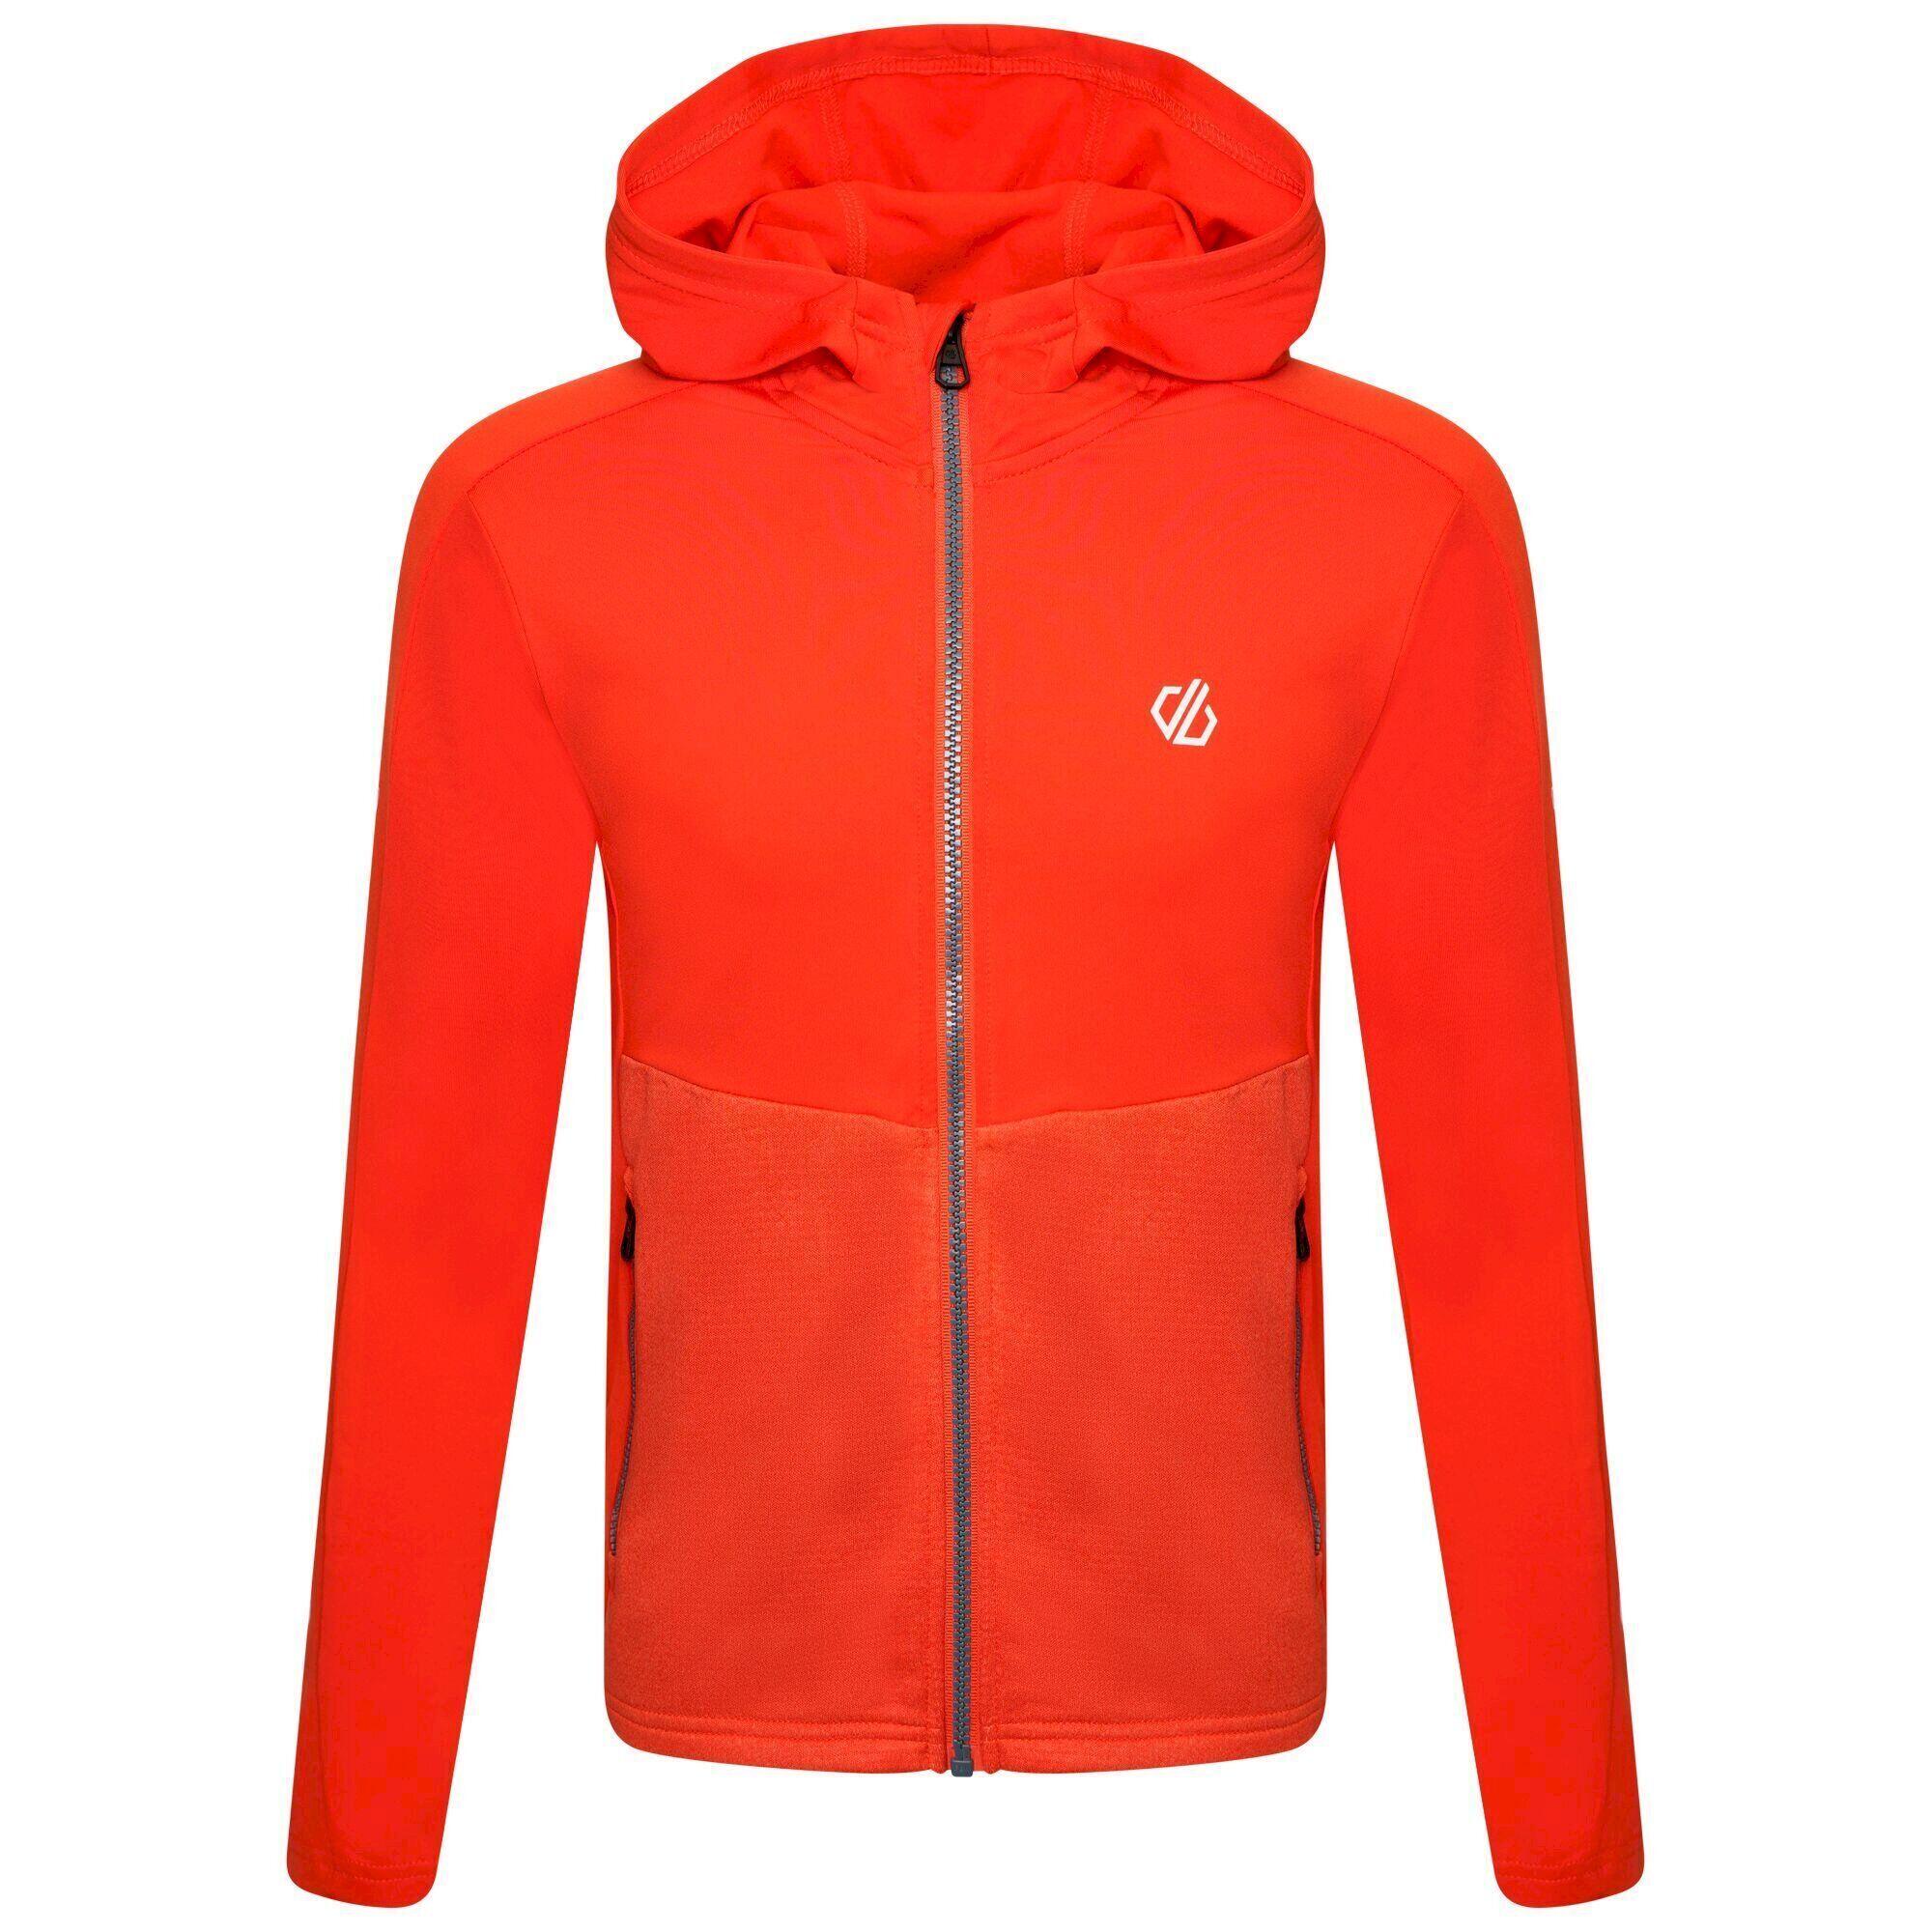 Childrens/Kids Hastily Core Stretch Recycled Midlayer (Bright Salmon) 1/4